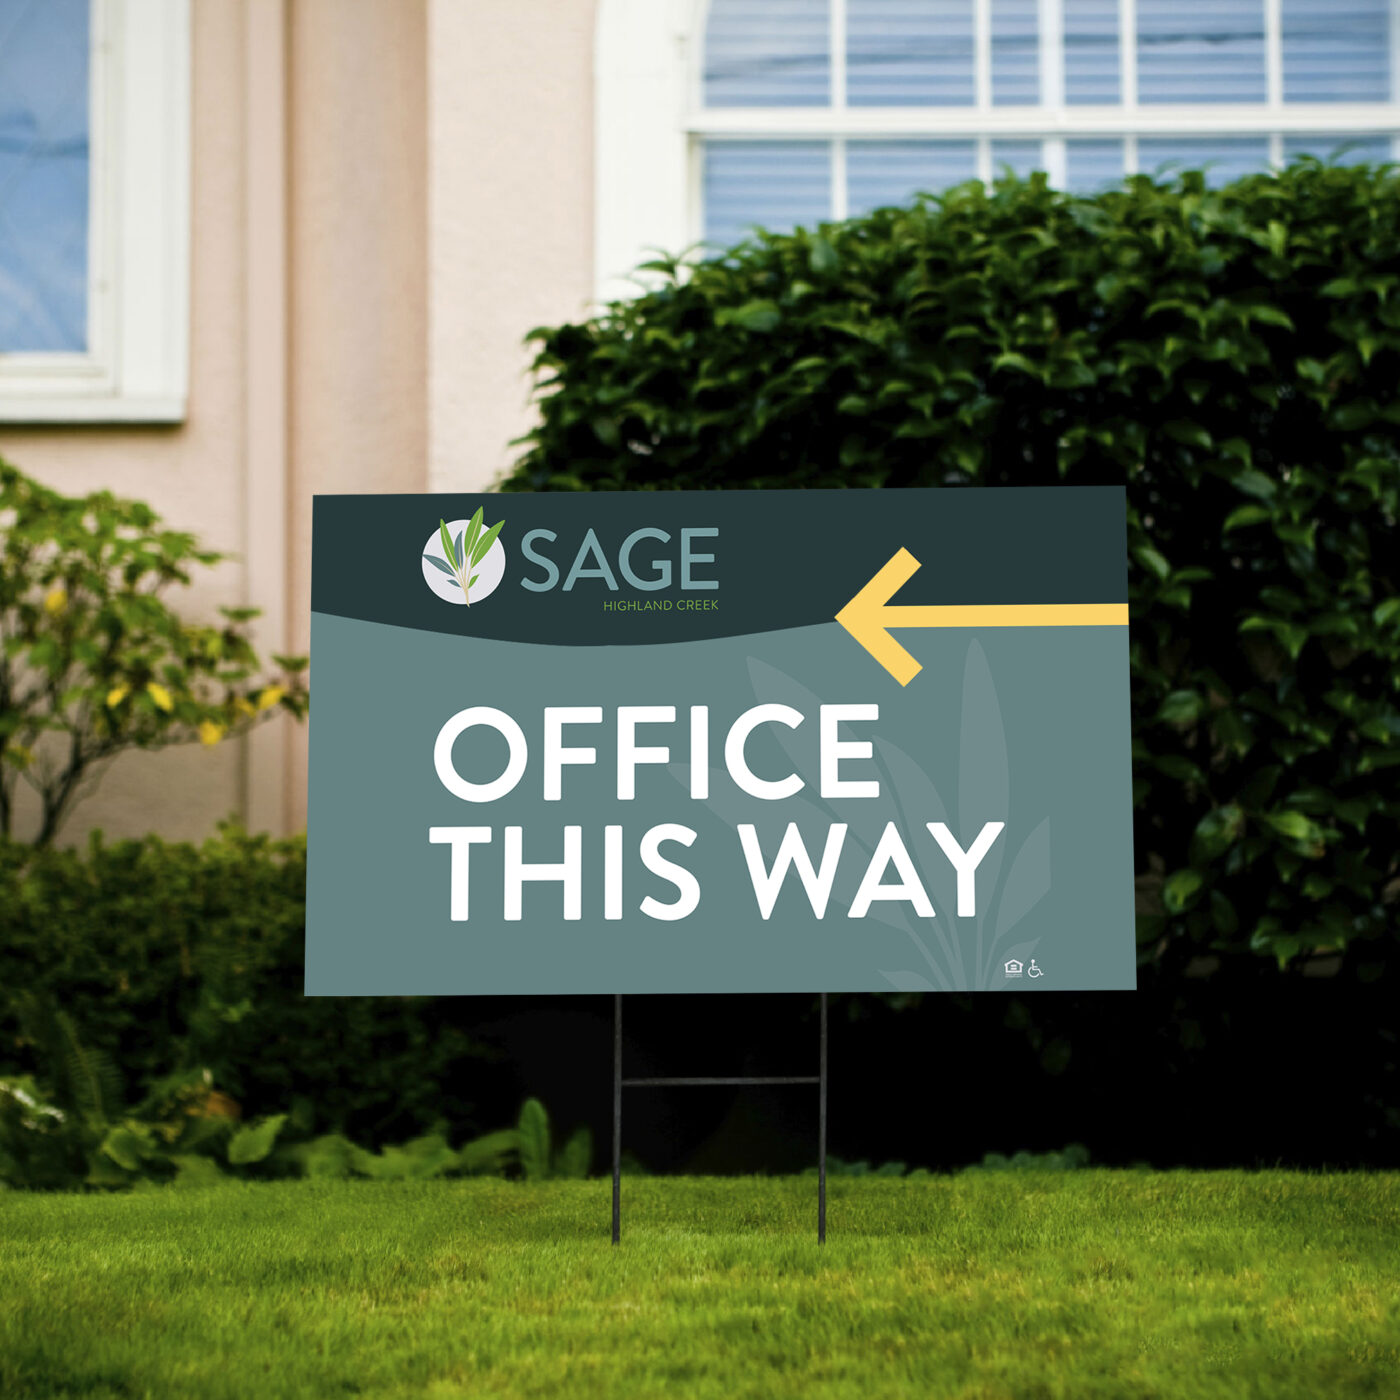 Signage Marketing that Generates Leads who Lease